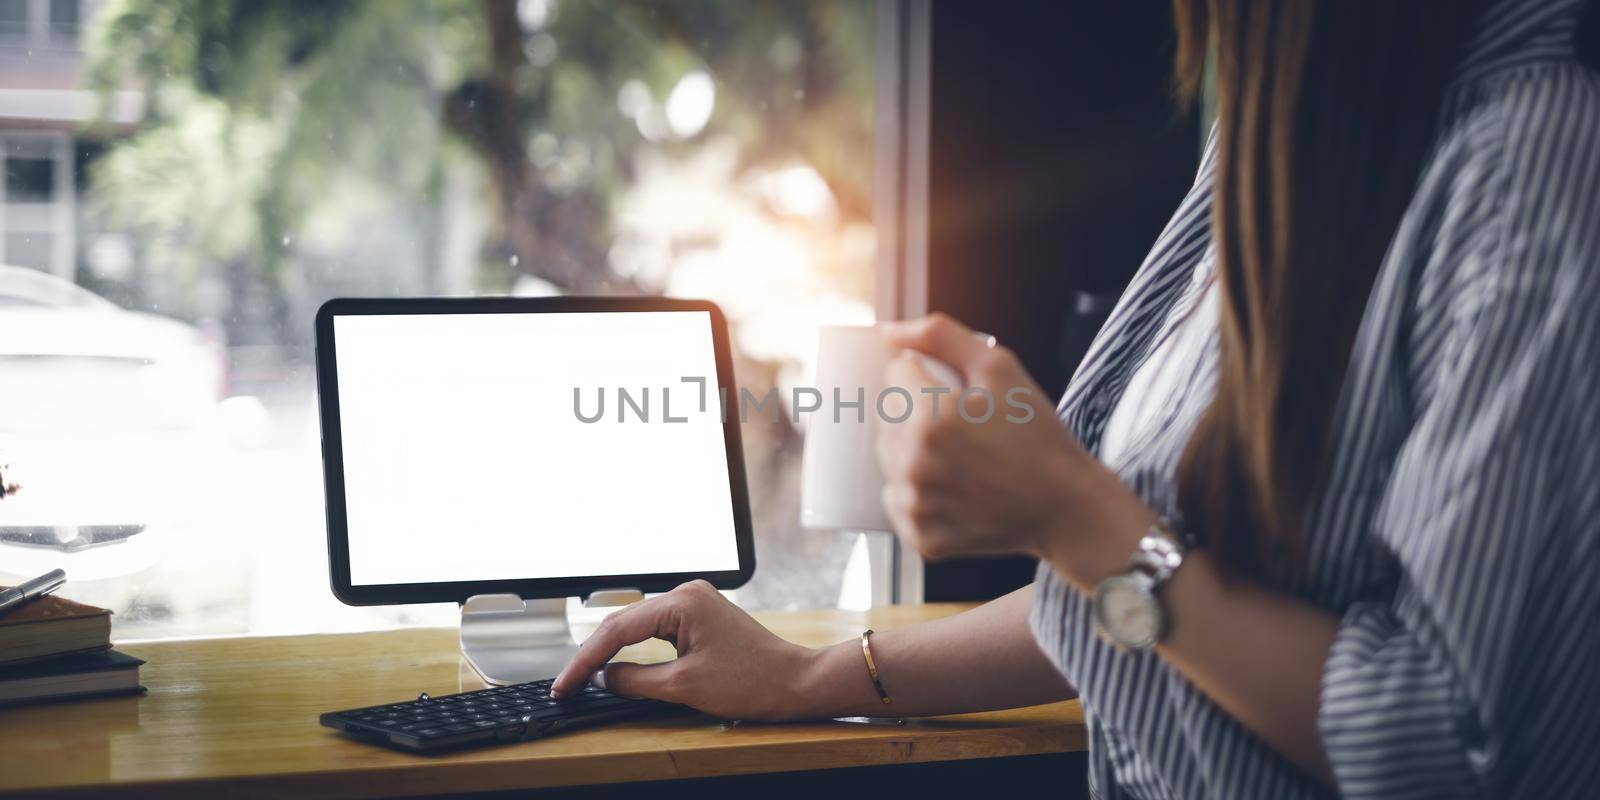 Mockup image of a black tablet with white blank screen on wooden desk by itchaznong